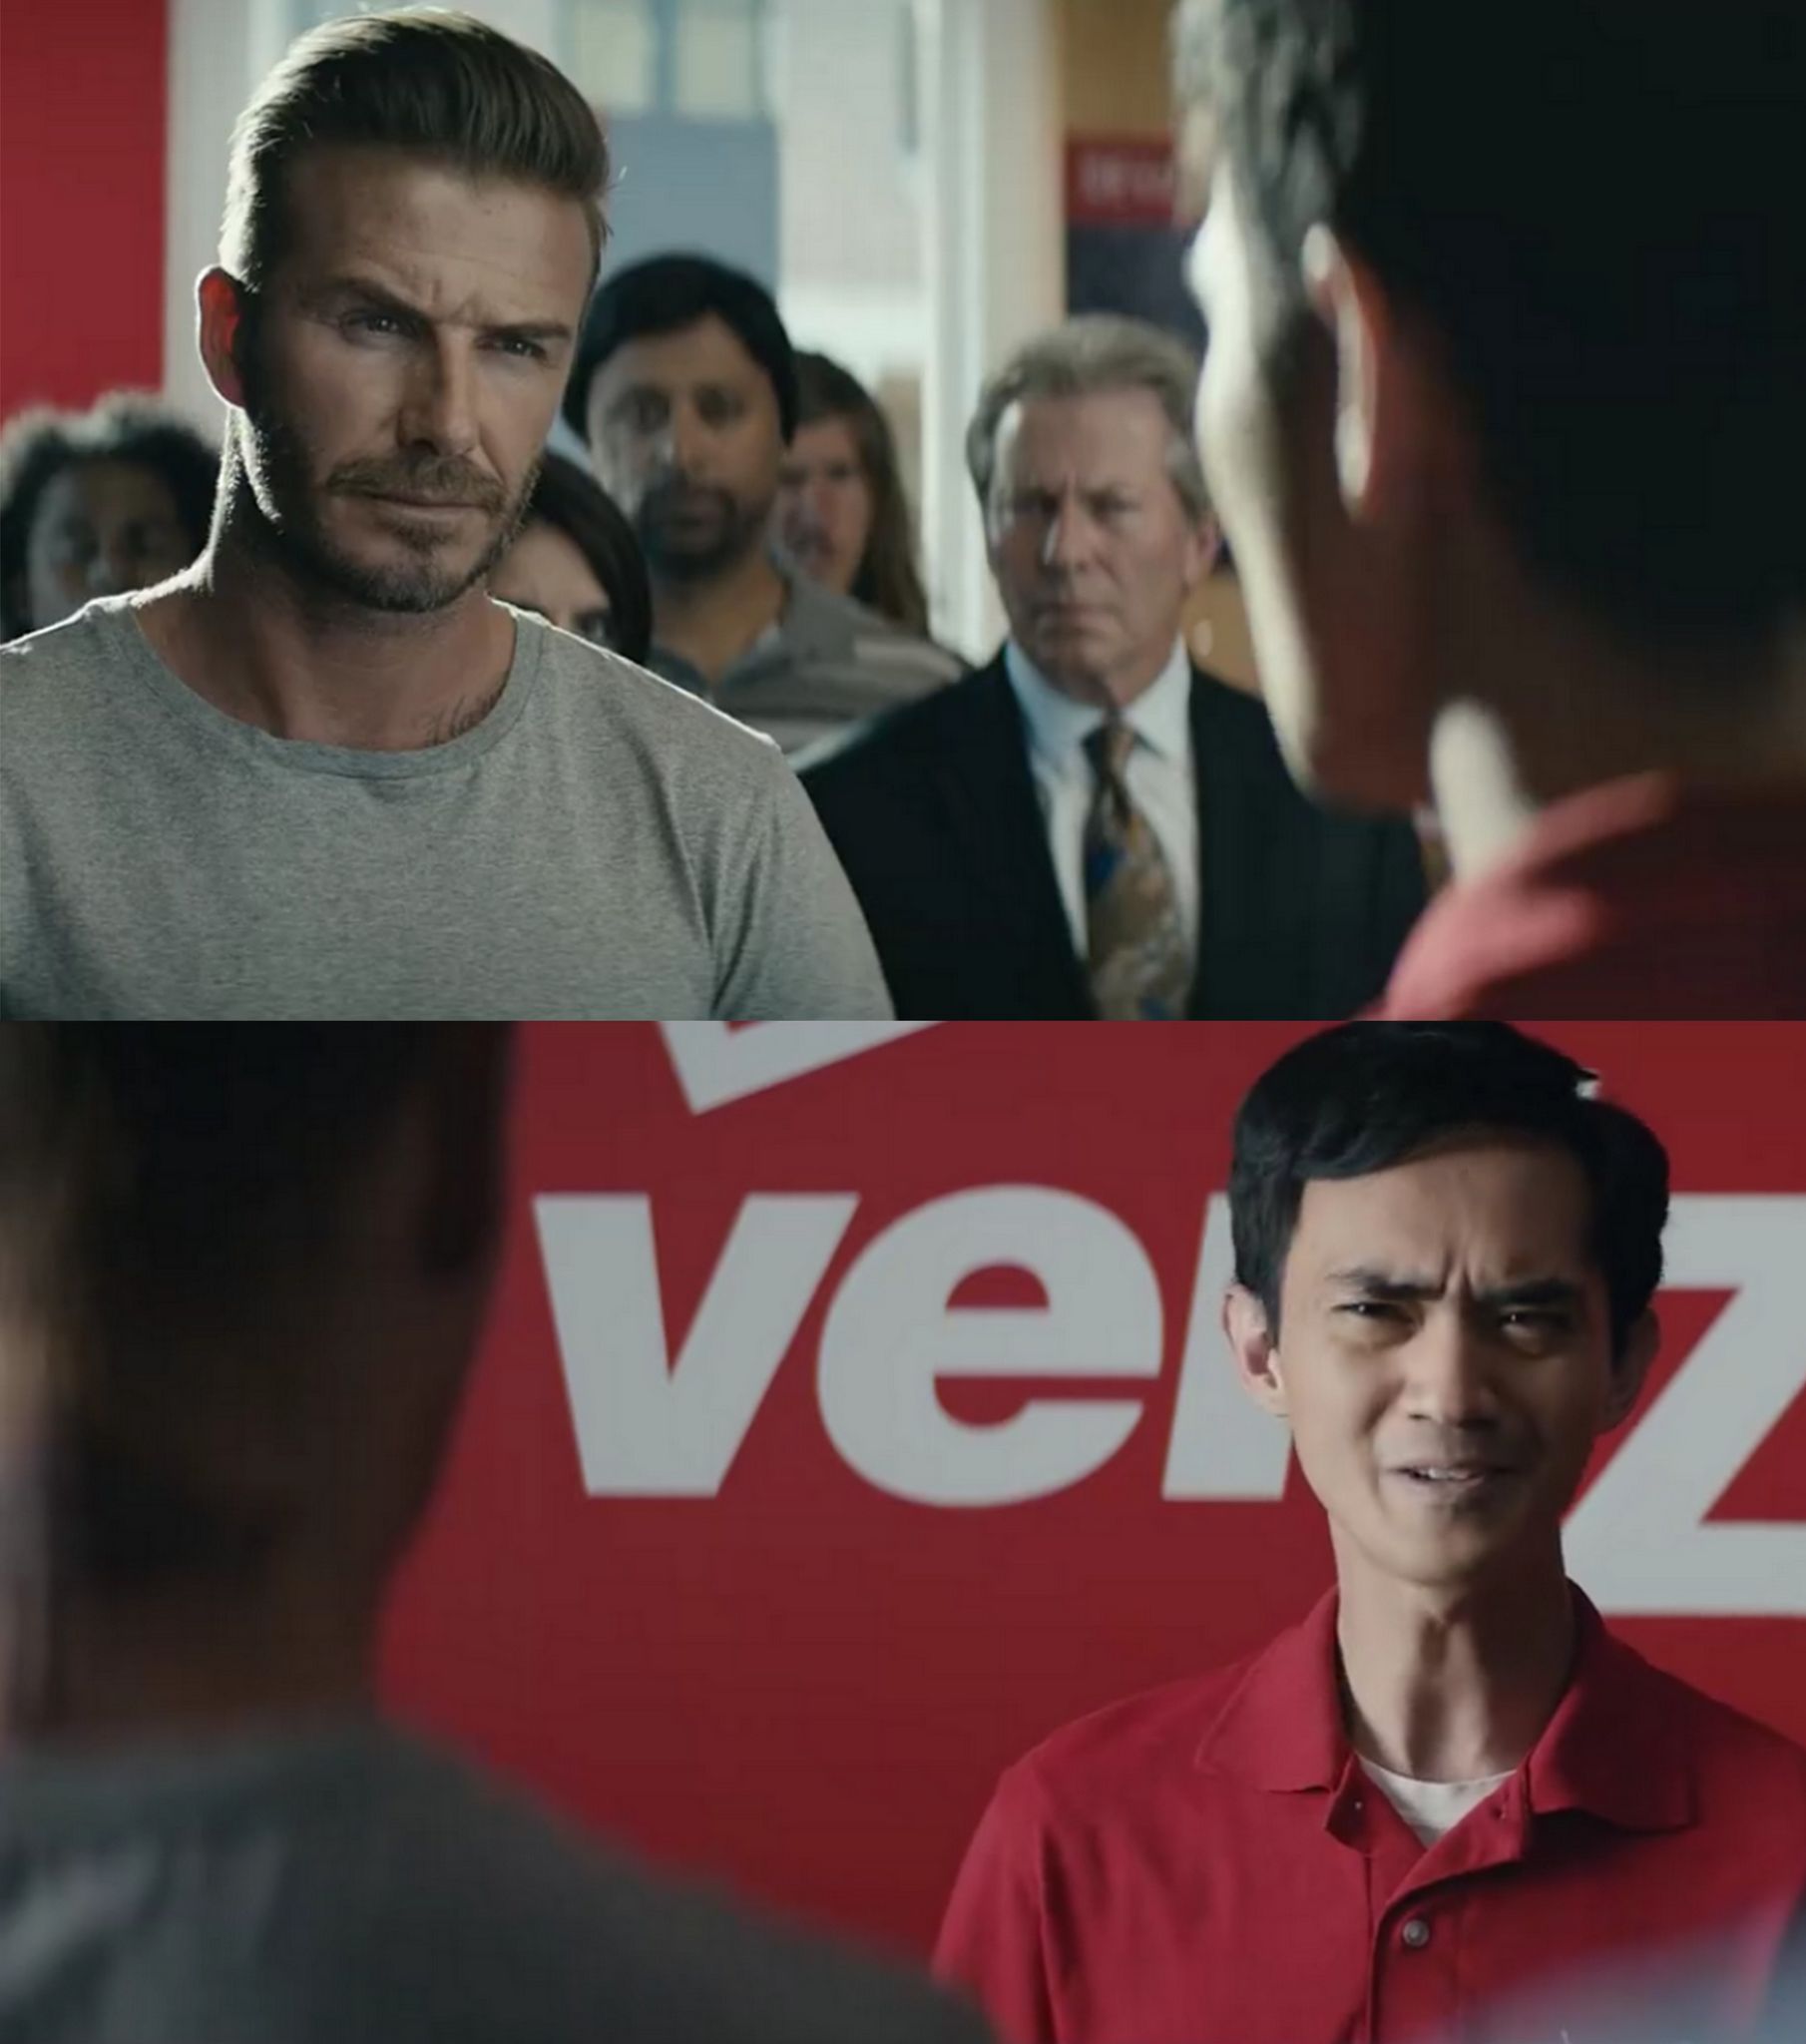 Sprint "All In" with David Beckham